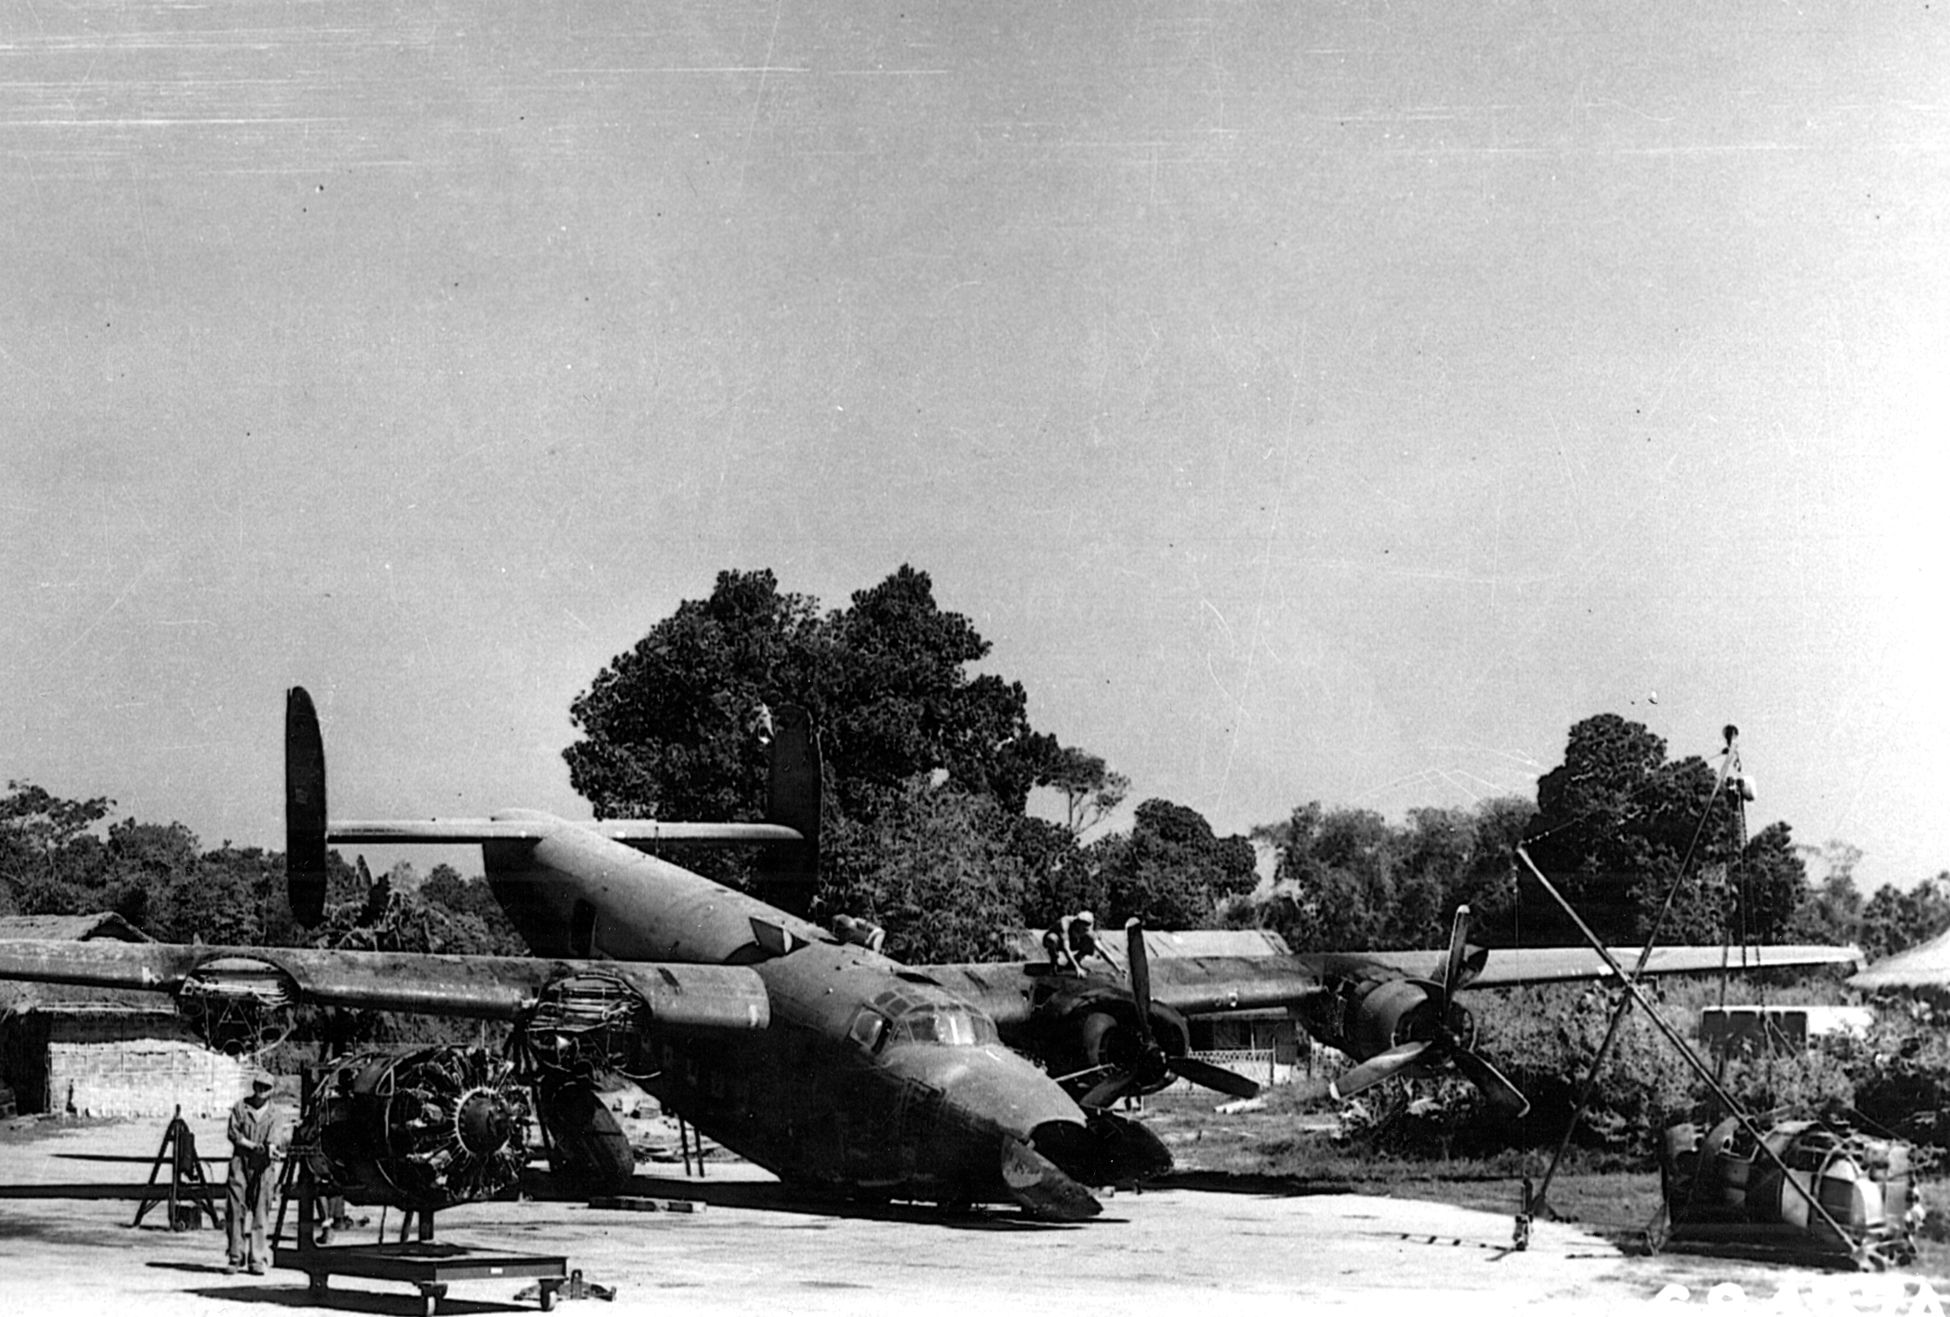 A C-87 transport, which has crashed at an airfield in India, is salvaged by ground crewmen in the hopes that it will be airworthy once again. The C-87 was the transport version of the B-24 Liberator heavy bomber. 